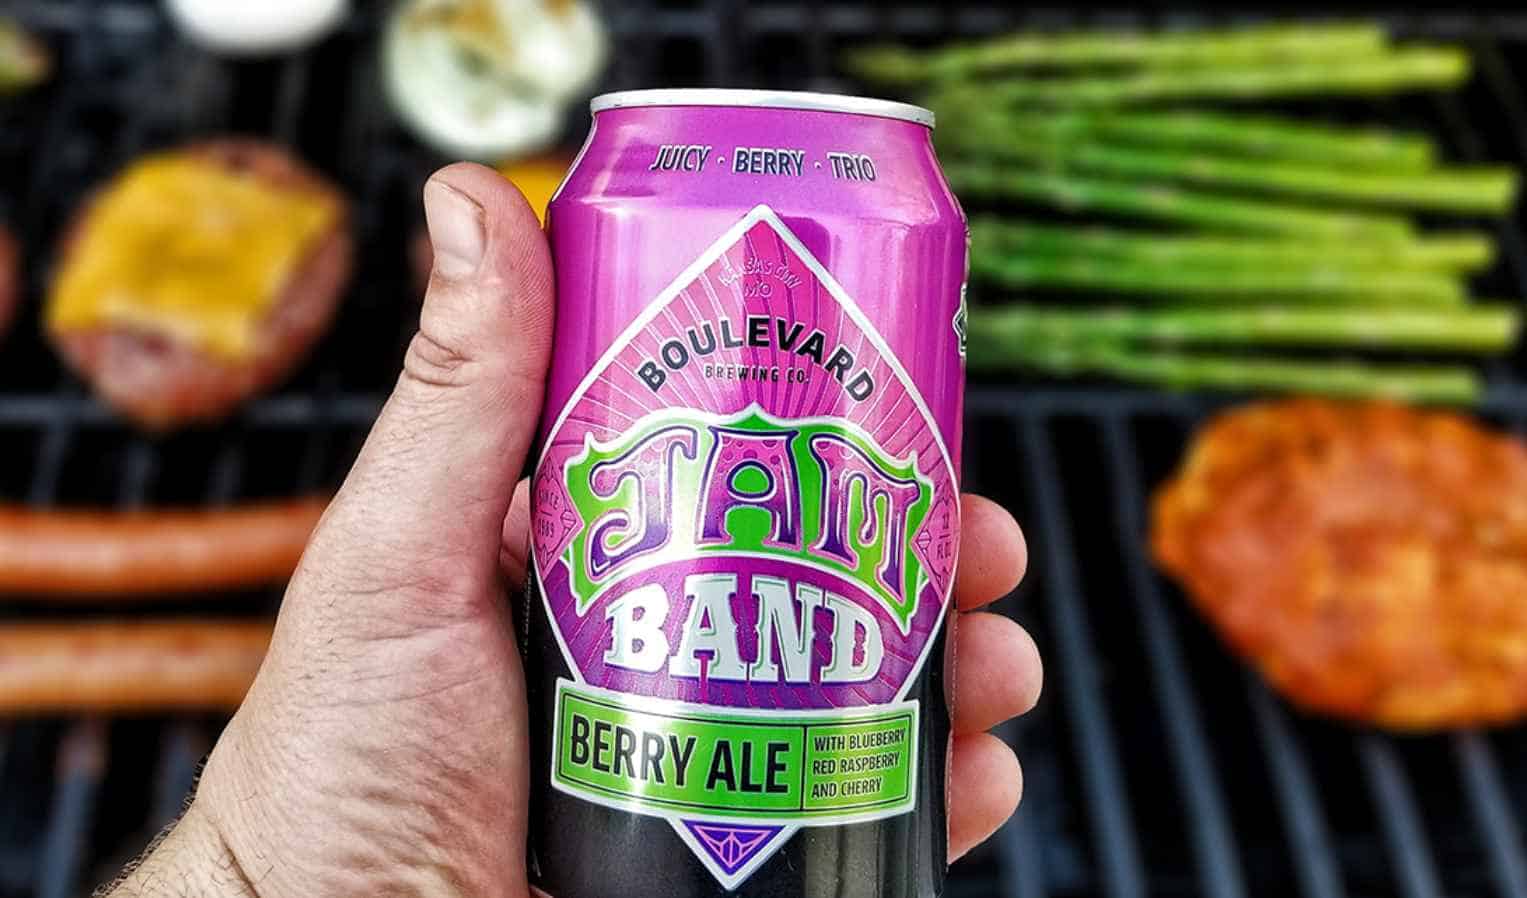 Berry Ale by Boulevard Jam Band